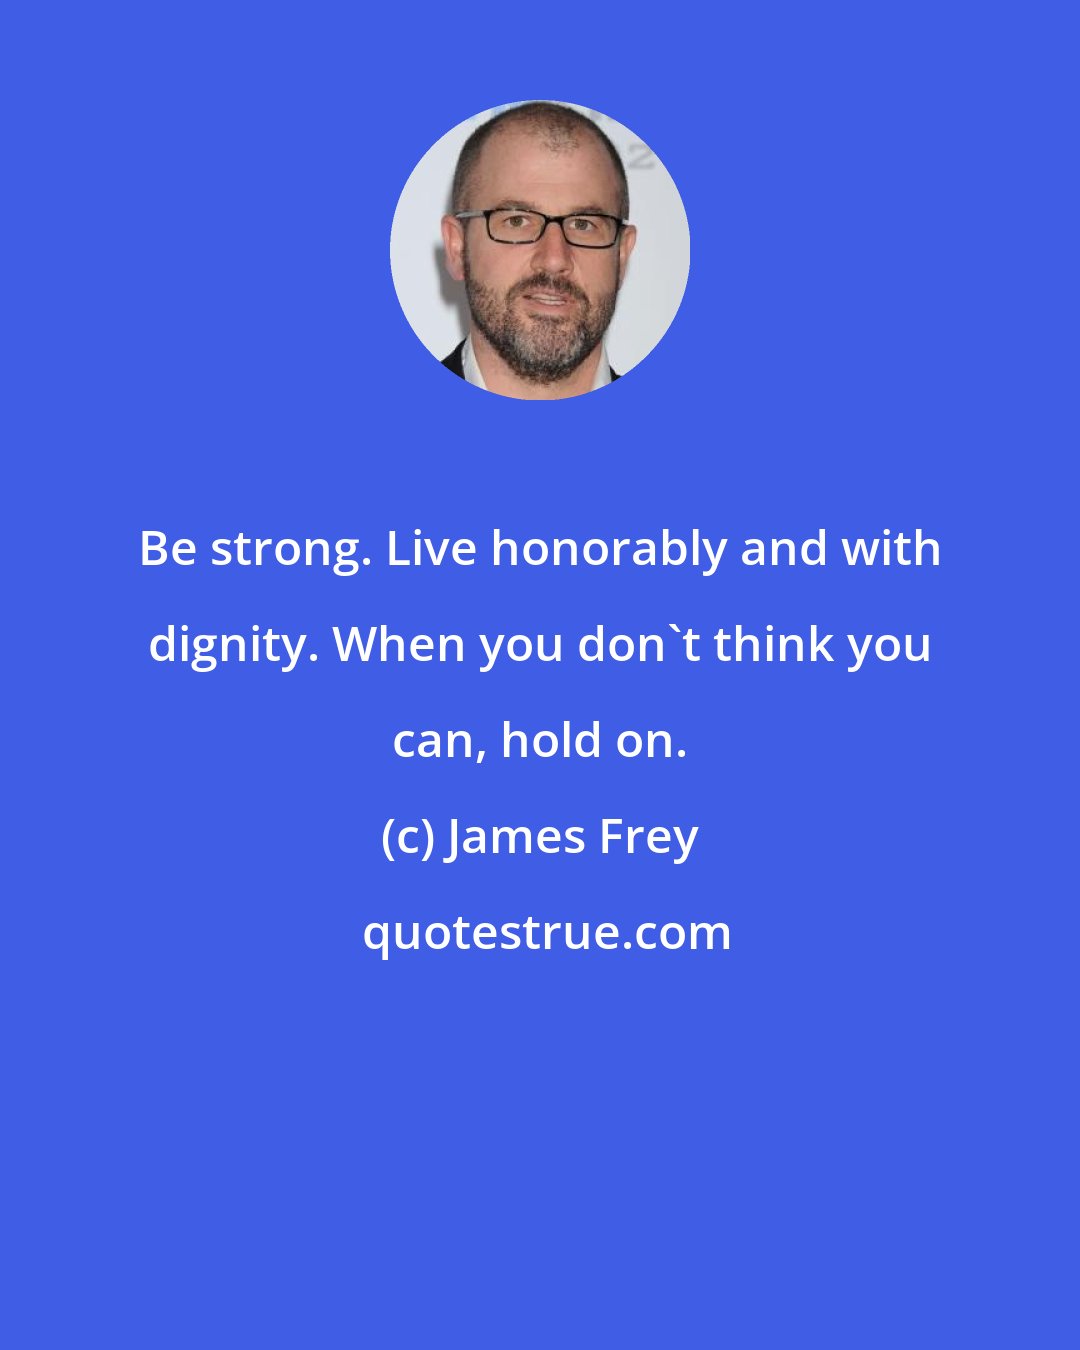 James Frey: Be strong. Live honorably and with dignity. When you don't think you can, hold on.